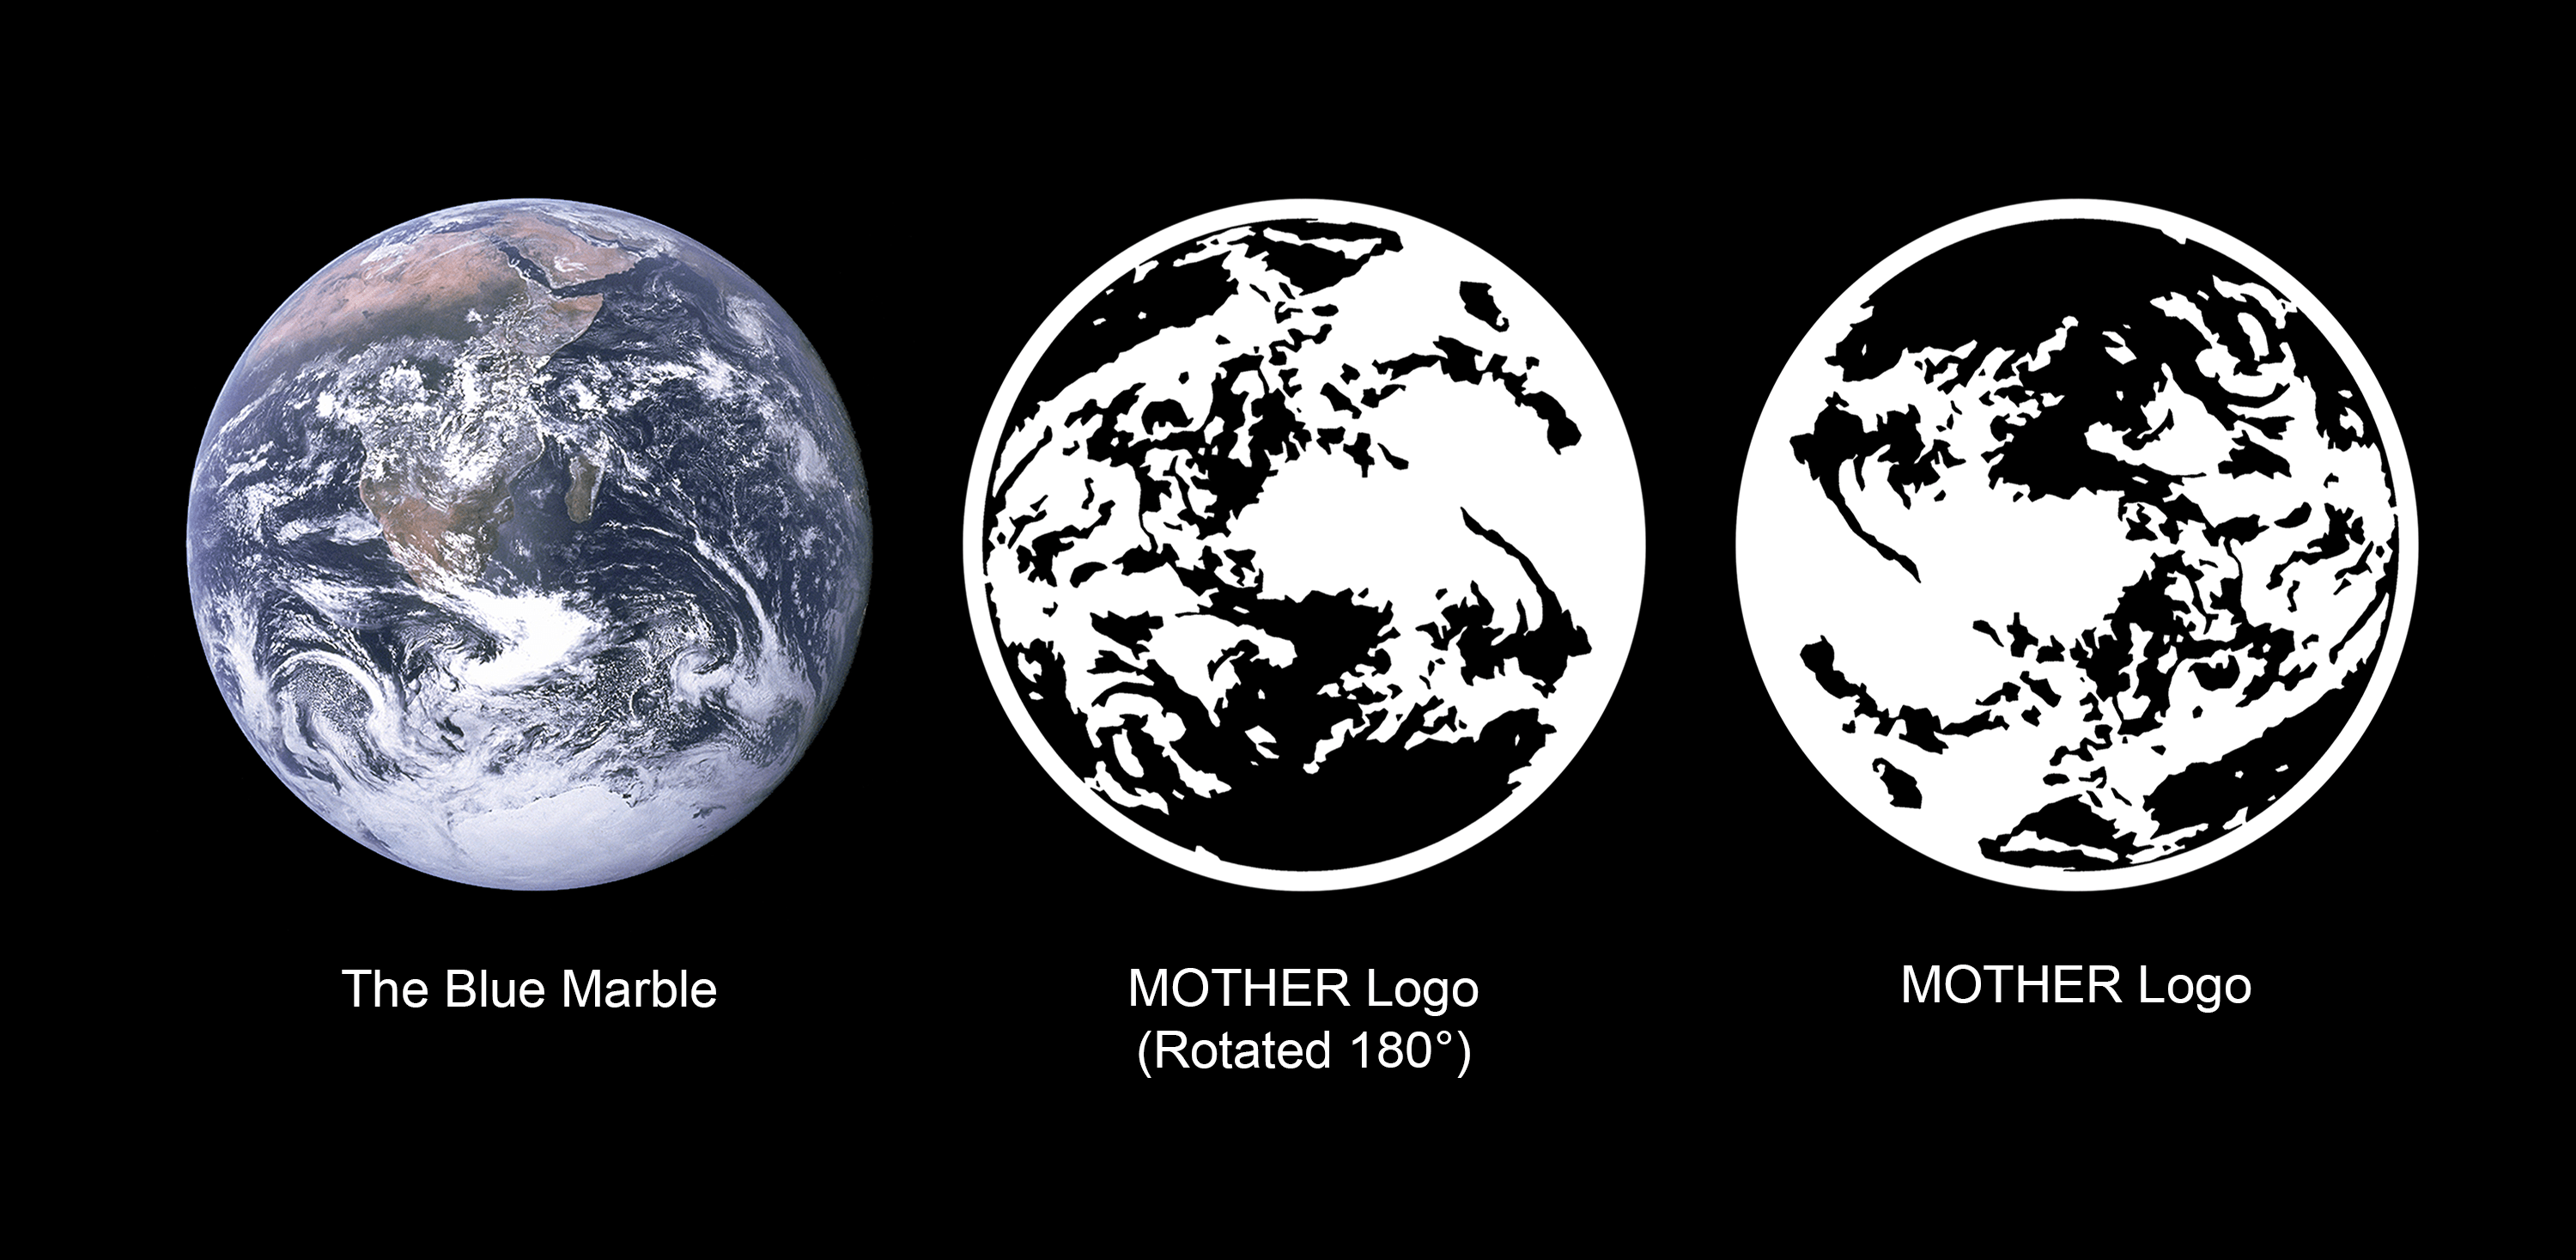 White and Blue Earth Logo - TIL The MOTHER Logo is the Famous Blue Marble Image Rotated 180